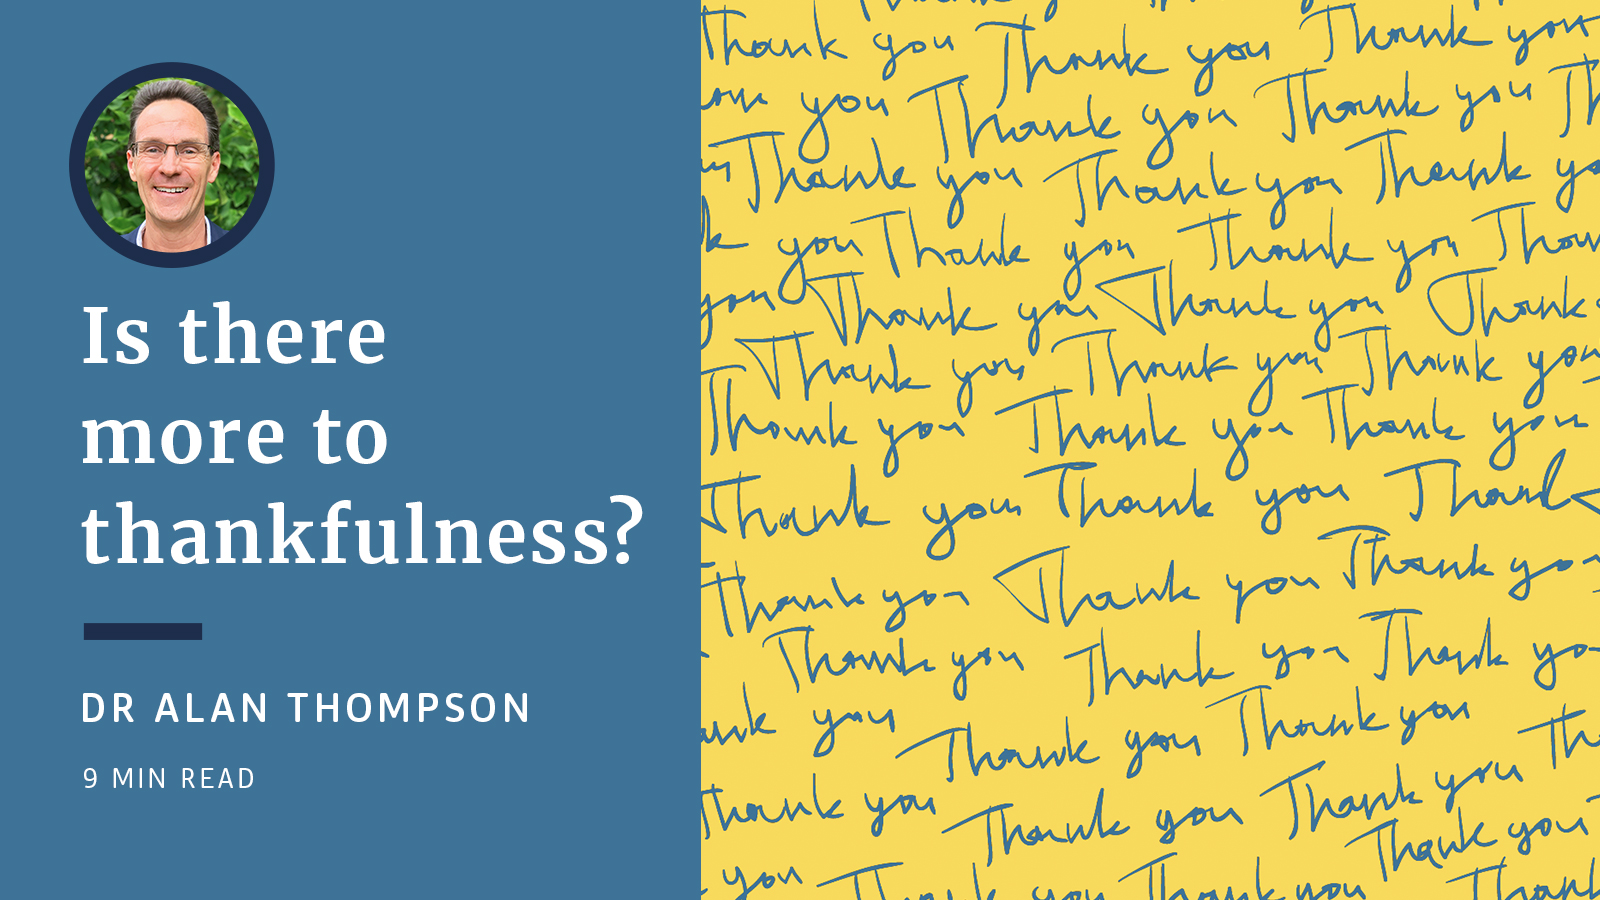 Image - Is there more to thankfulness?